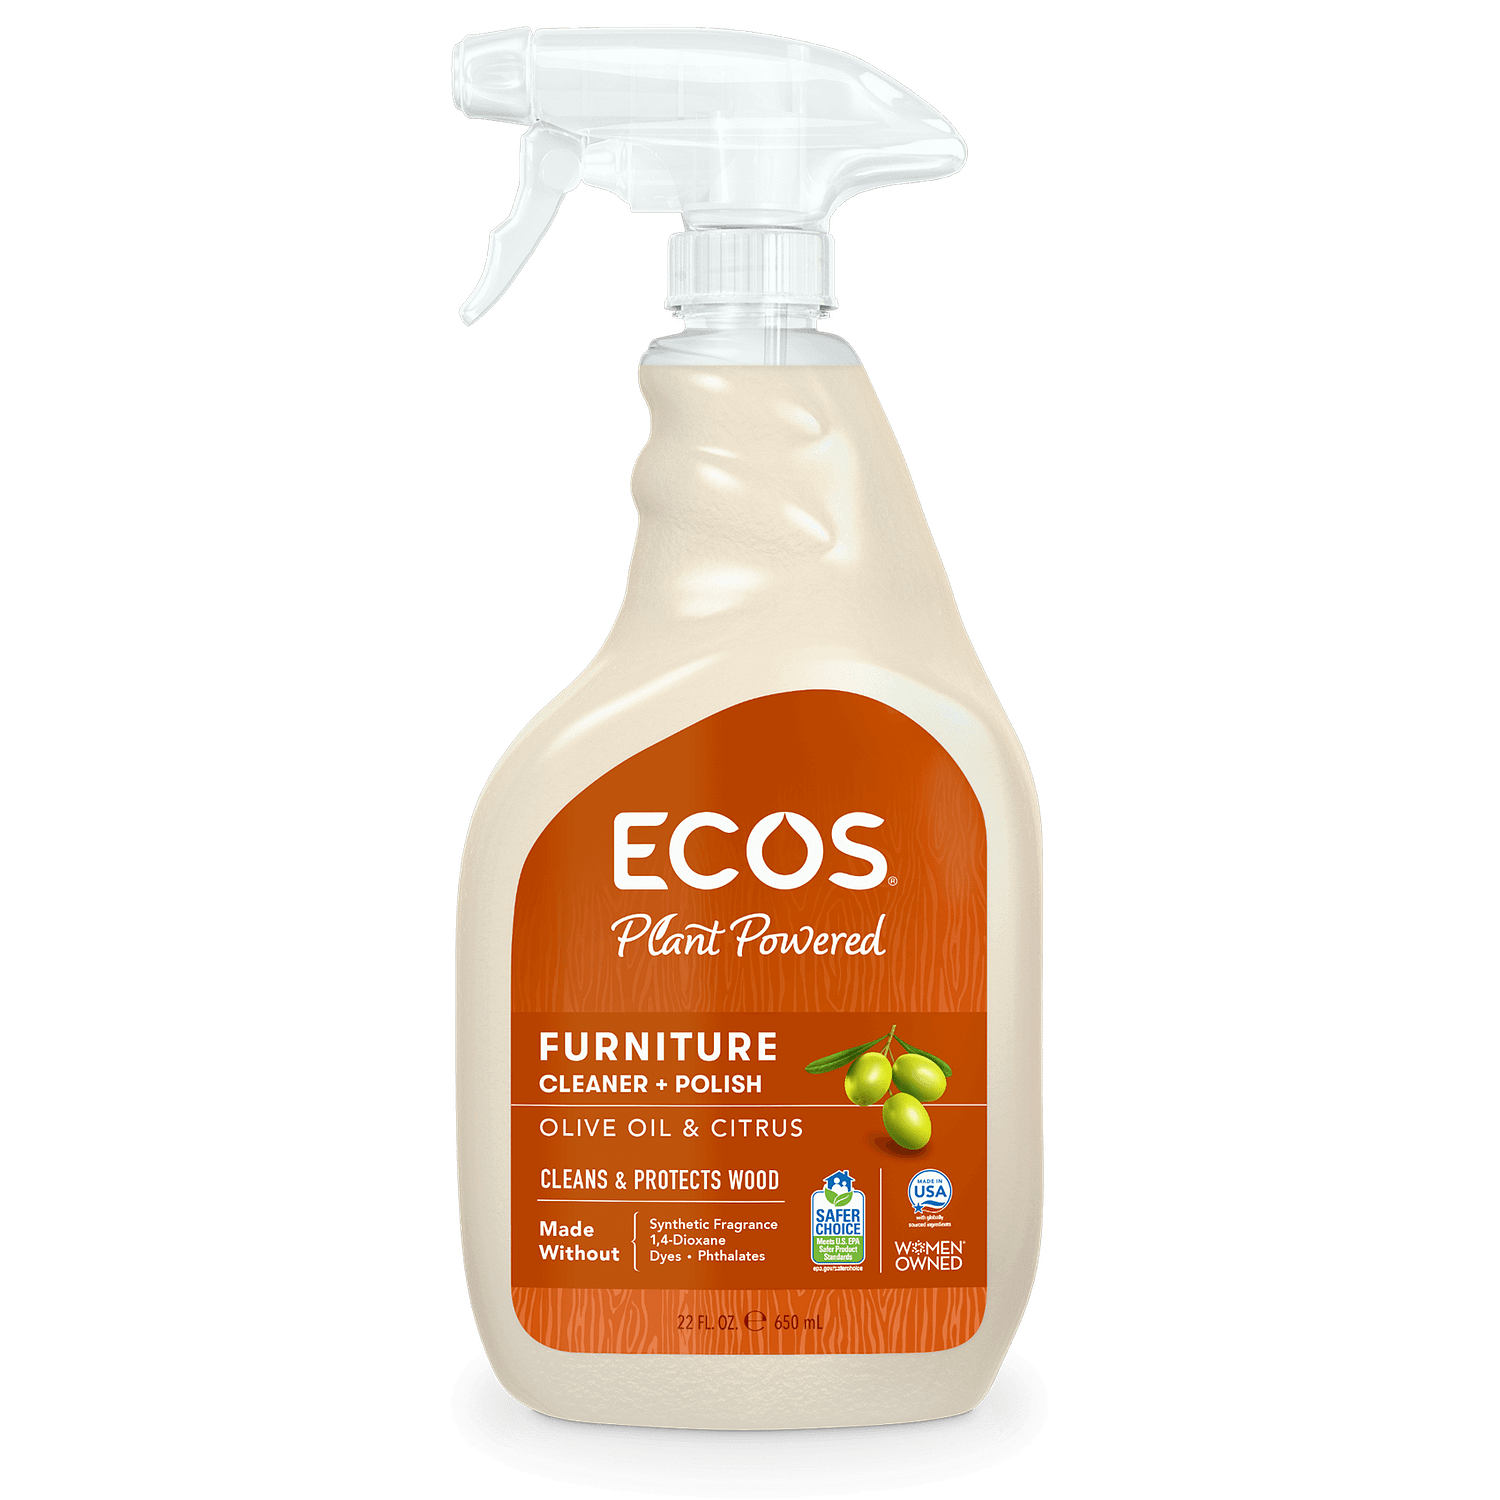 ECOS Furniture Cleaner Polish Front